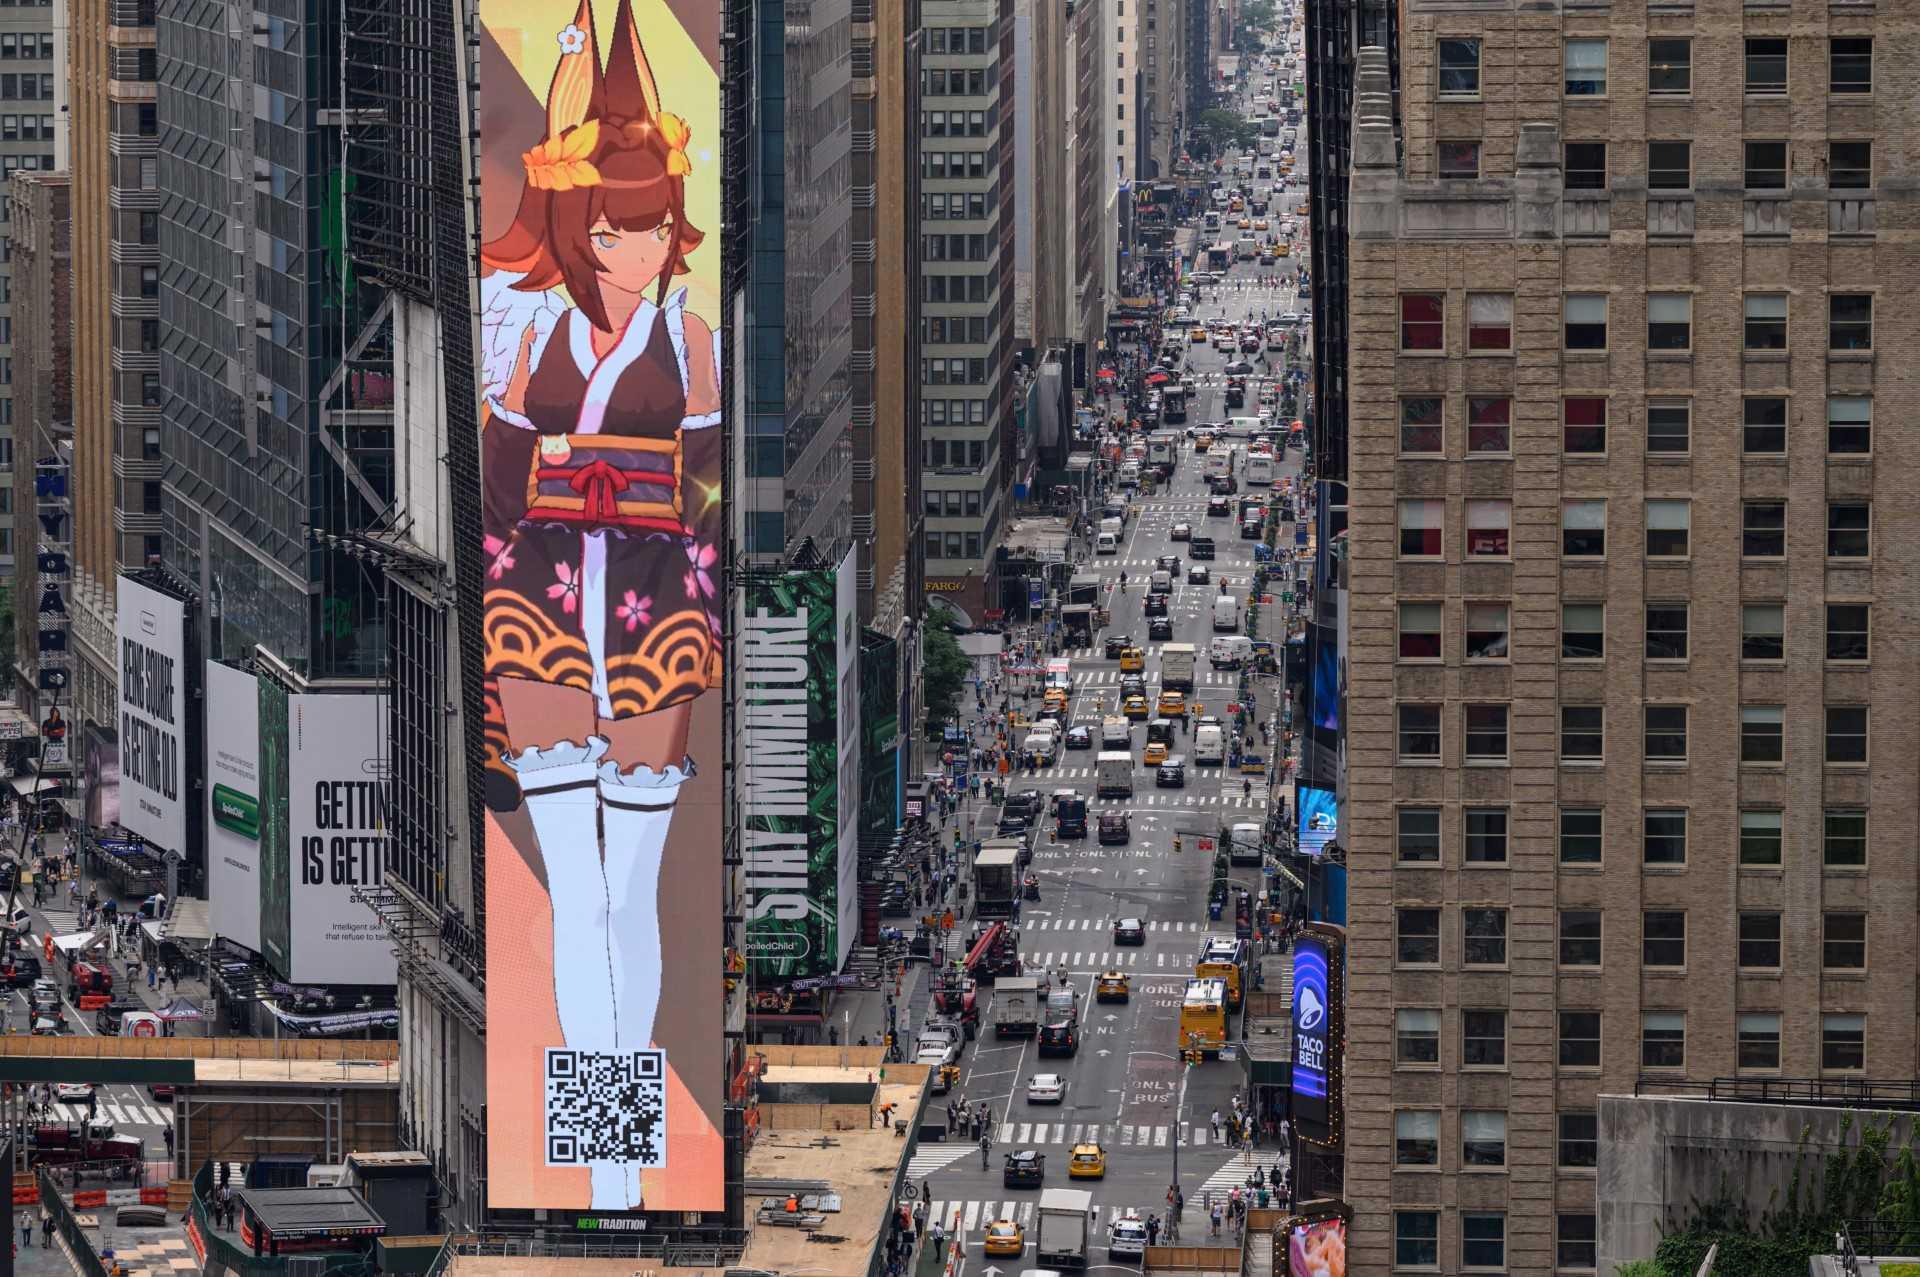 A general view shows traffic and pedestrians on a street in New York on June 21. Photo: AFP 